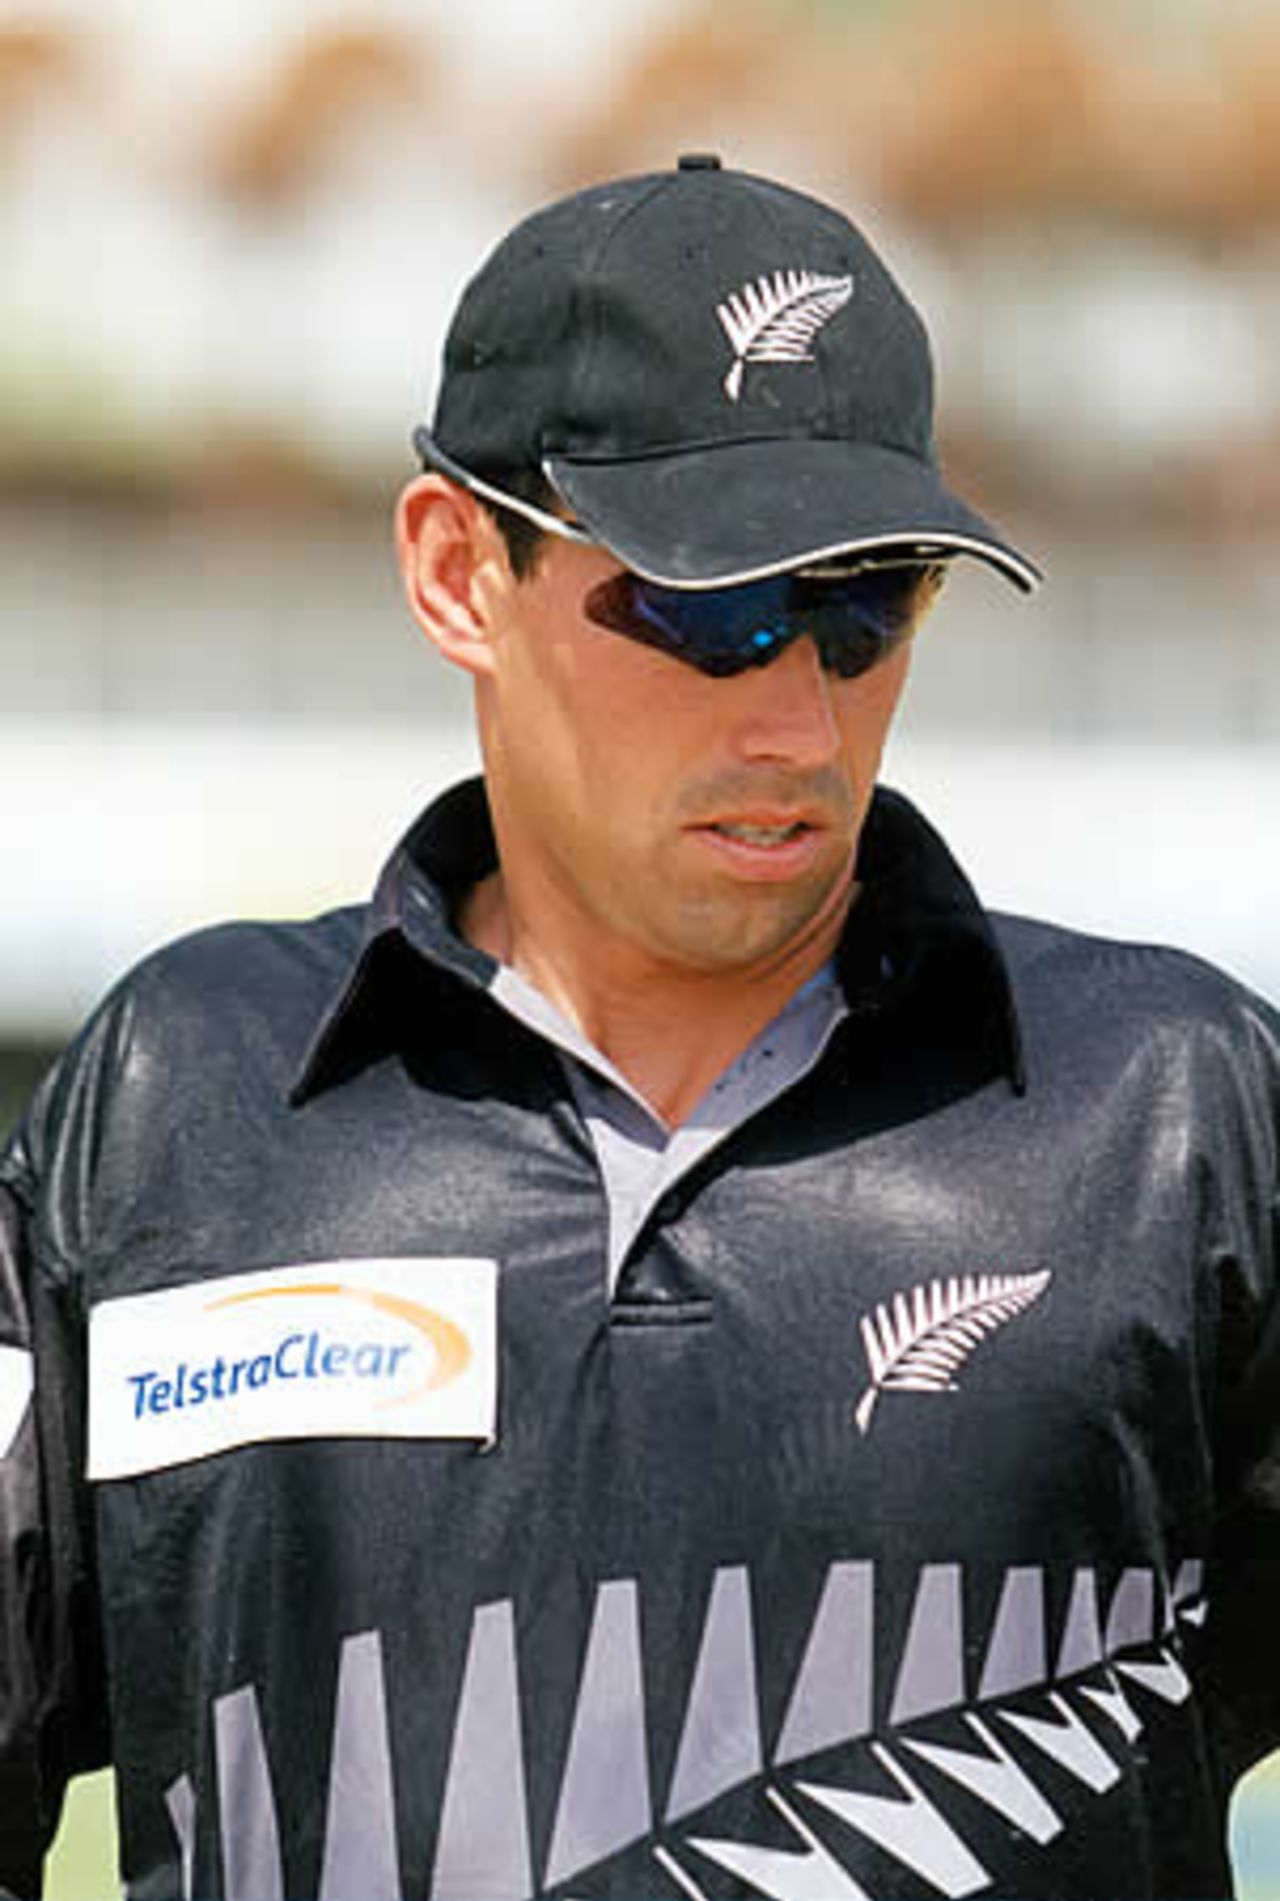 Stephen Fleming leads team out - 3rd ODI at Lahore, New Zealand v Pakistan, 27 Apr 2002